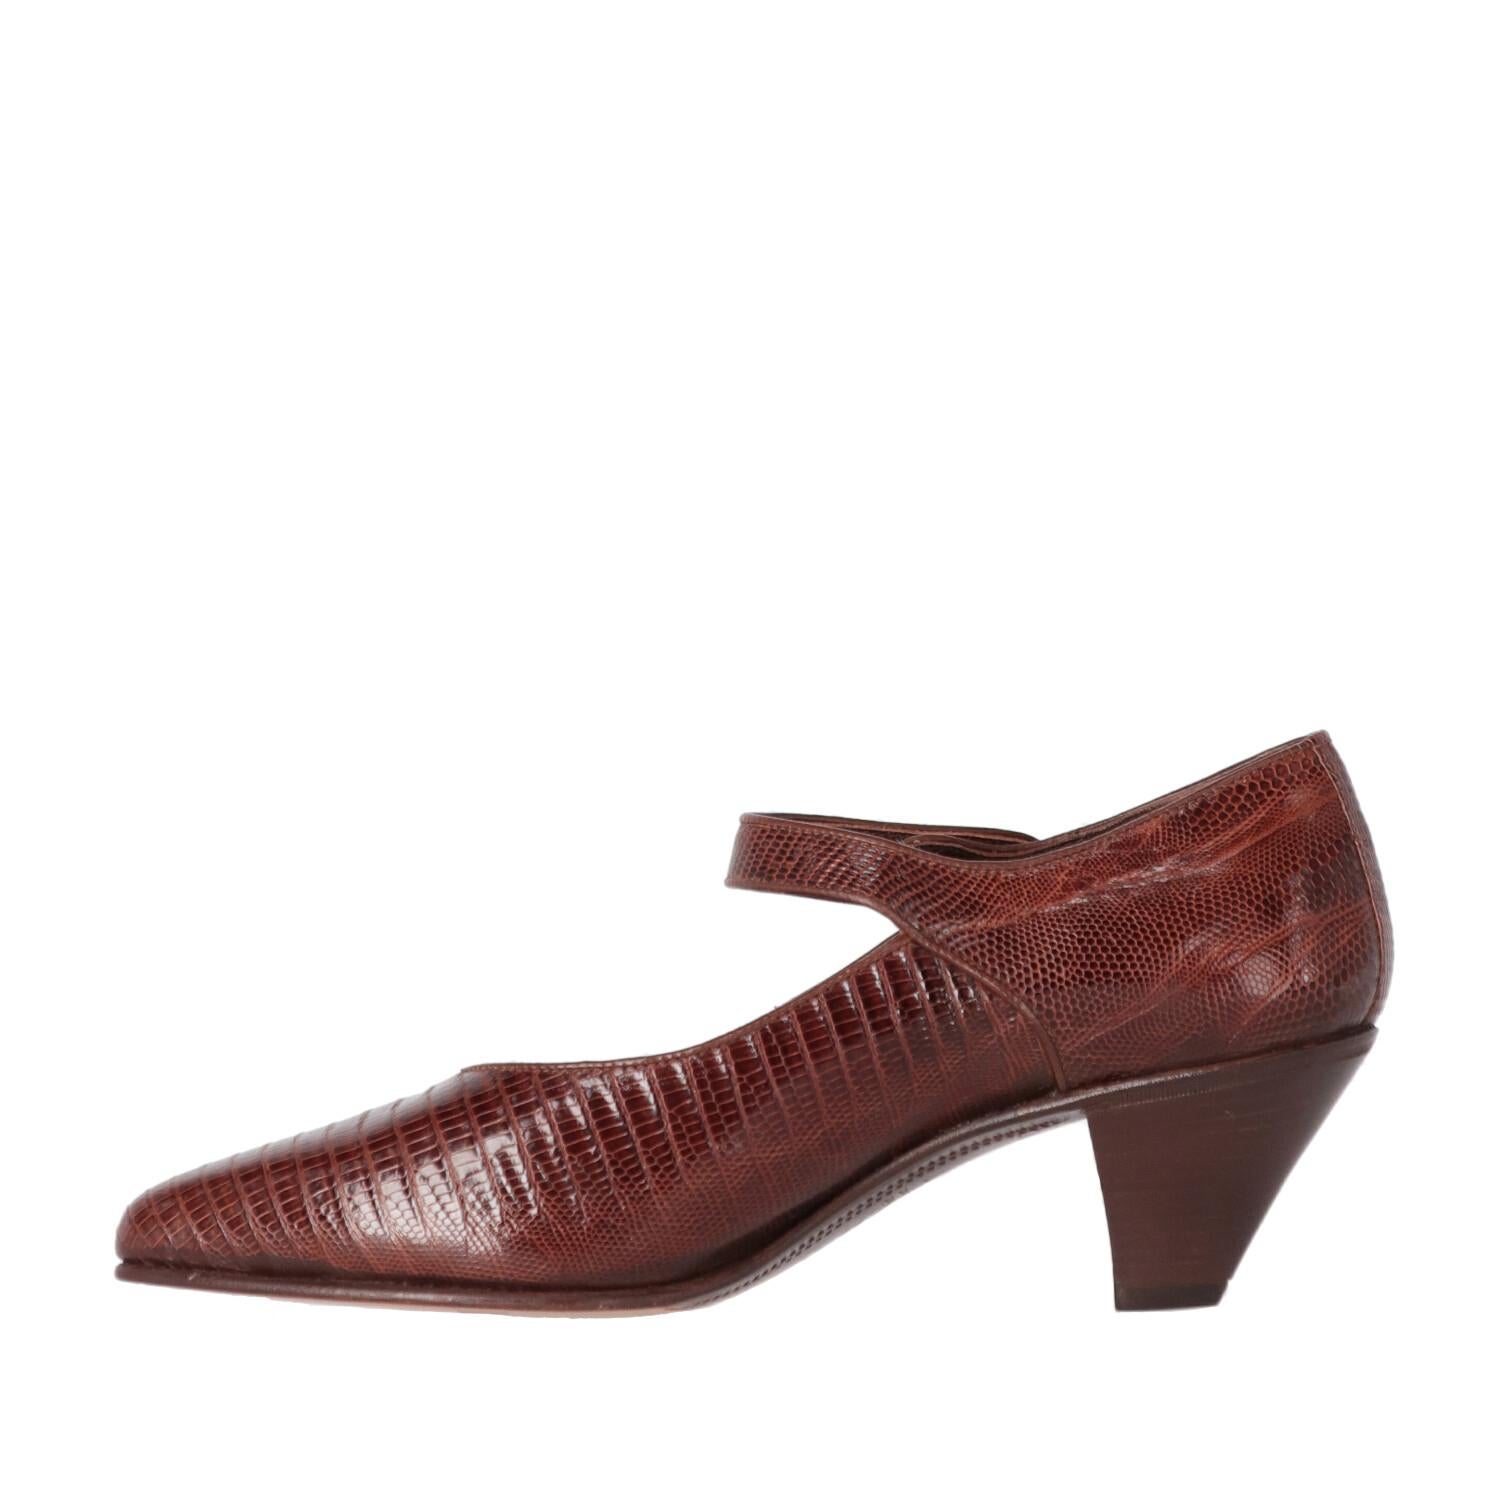 William brown Tejus lizard skin shoes. Mary Jane model with elastic button strap and low heels.

Size: 37 EU

Heel: 6 cm
Length insole: 23,5 cm

Product code: X0173

Composition: Leather

Made in: Italy

Condition: Never worn